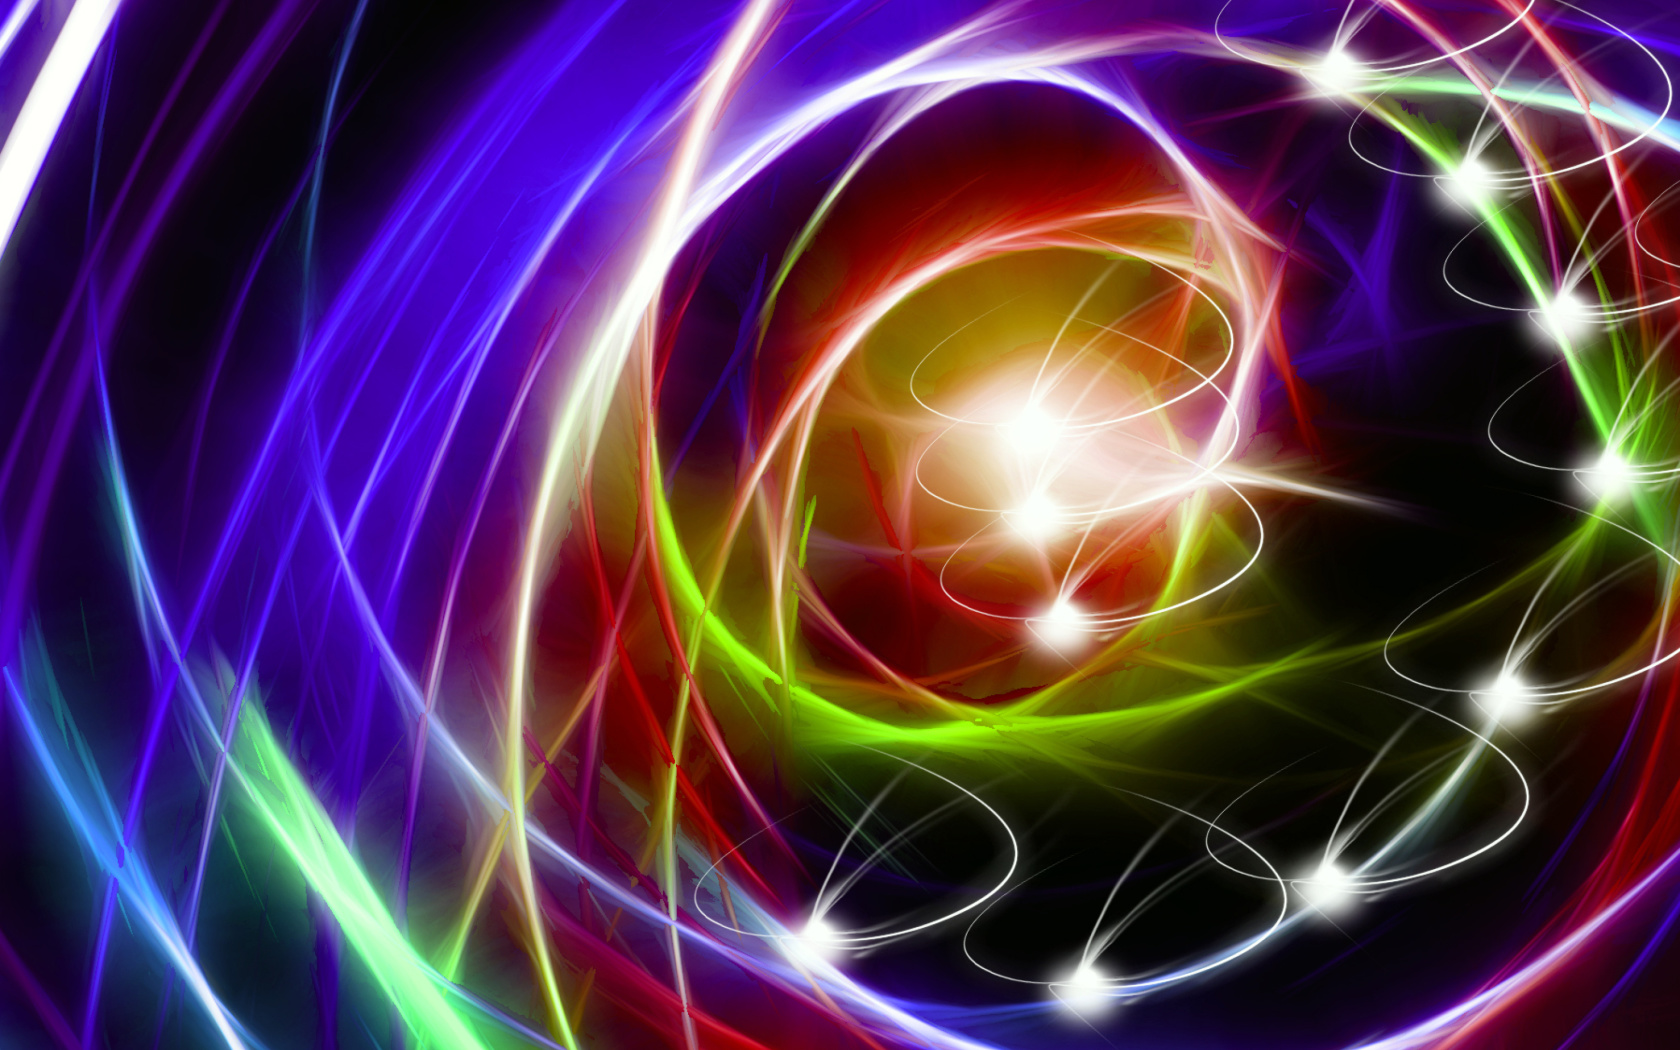 Abstraction chaos Rays wallpaper 1680x1050